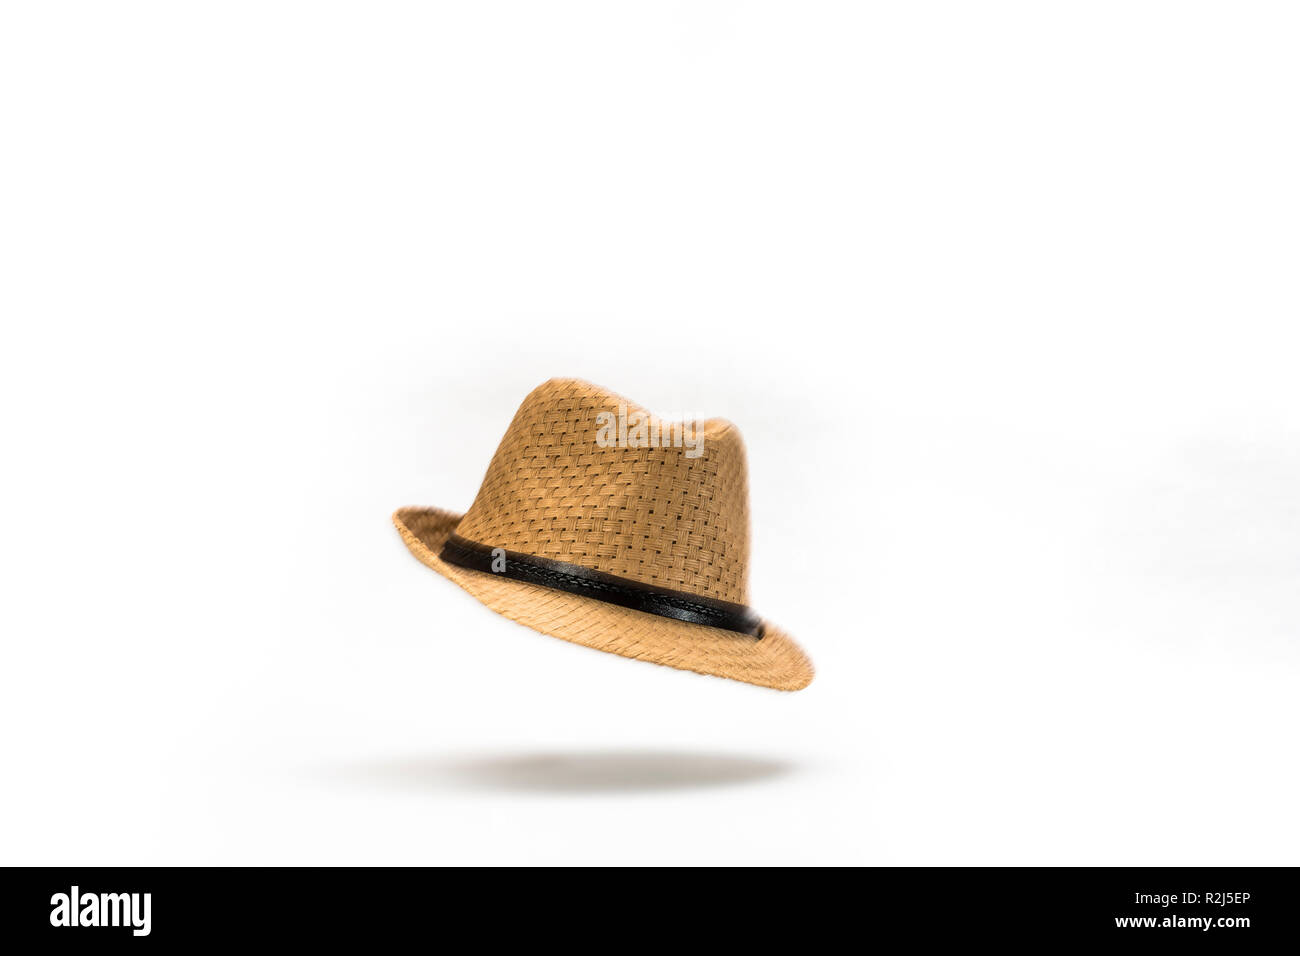 At the Drop of a Hat. A straw panama hat falling against a white background. Stock Photo